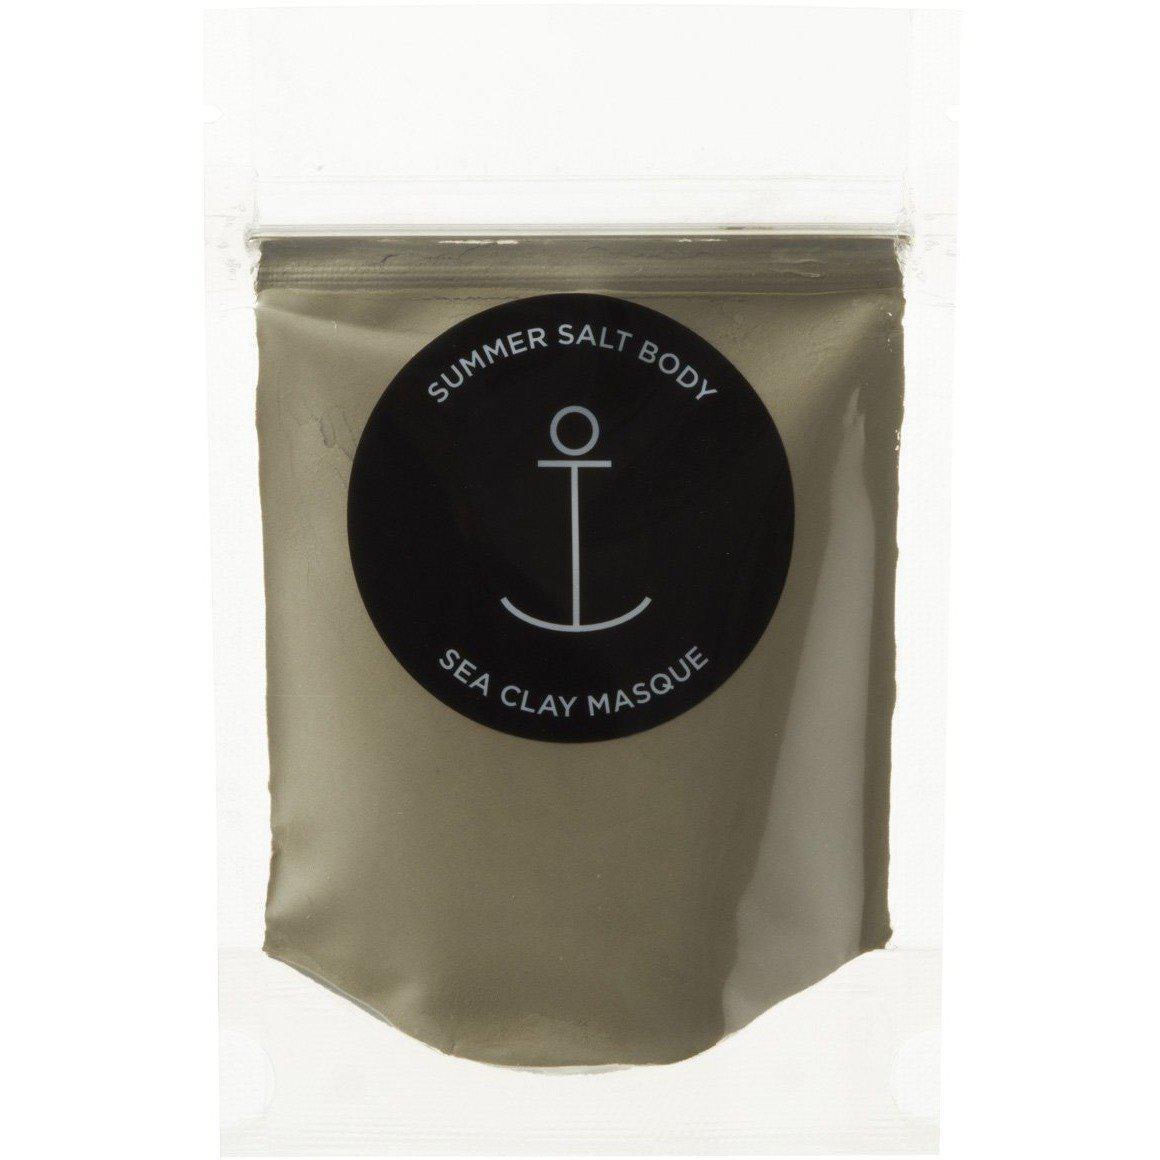 Mini Clay Mask - 40g-Beauty & Well-Being-Summer Salt Body-Green Clay-The Bay Room